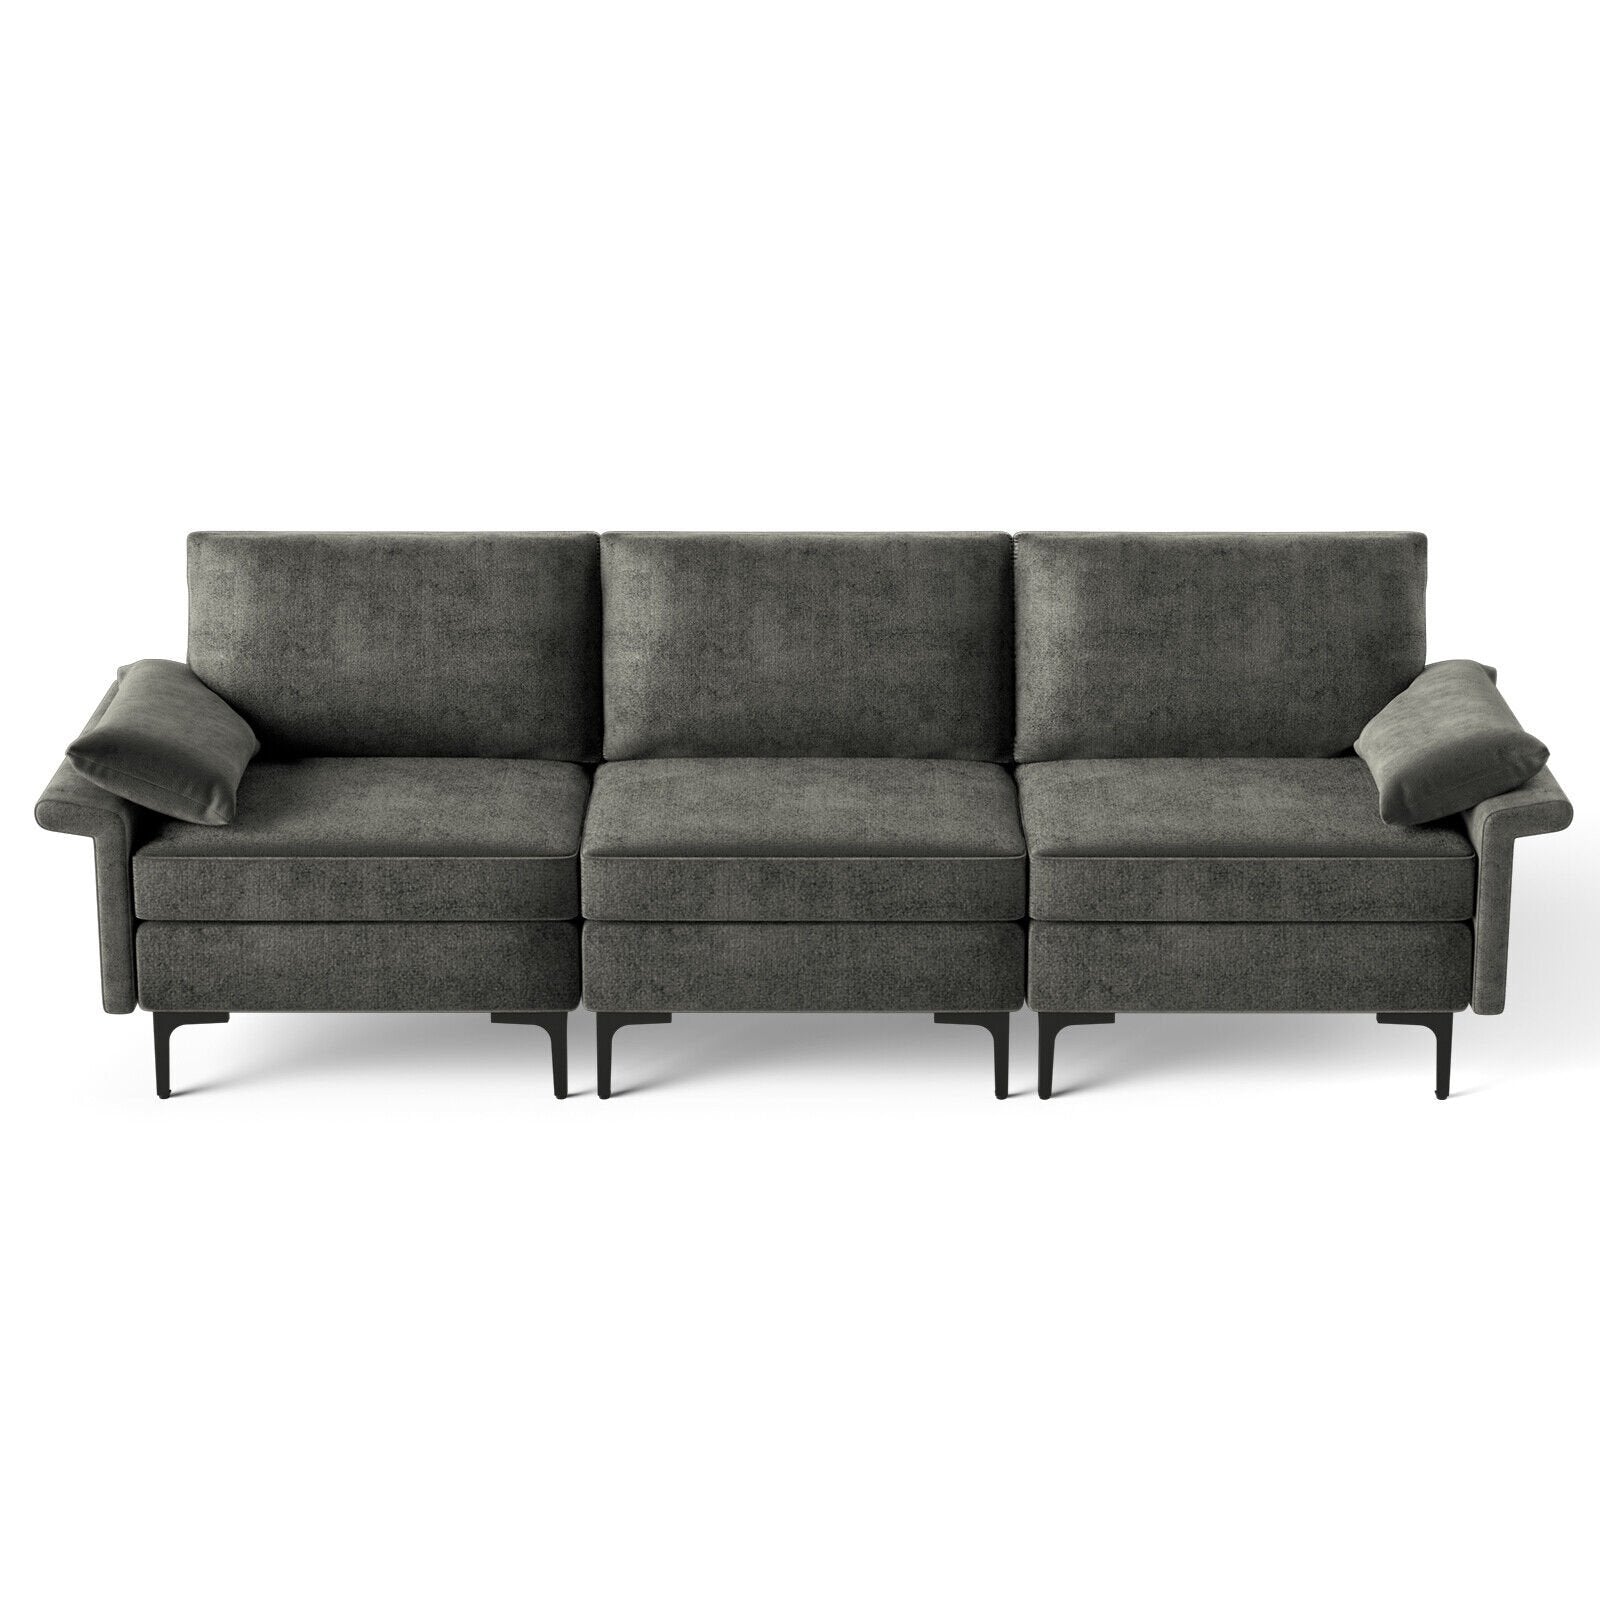 Large 3-Seat Sofa Sectional with Metal Legs for 3-4 people, Gray - Gallery Canada